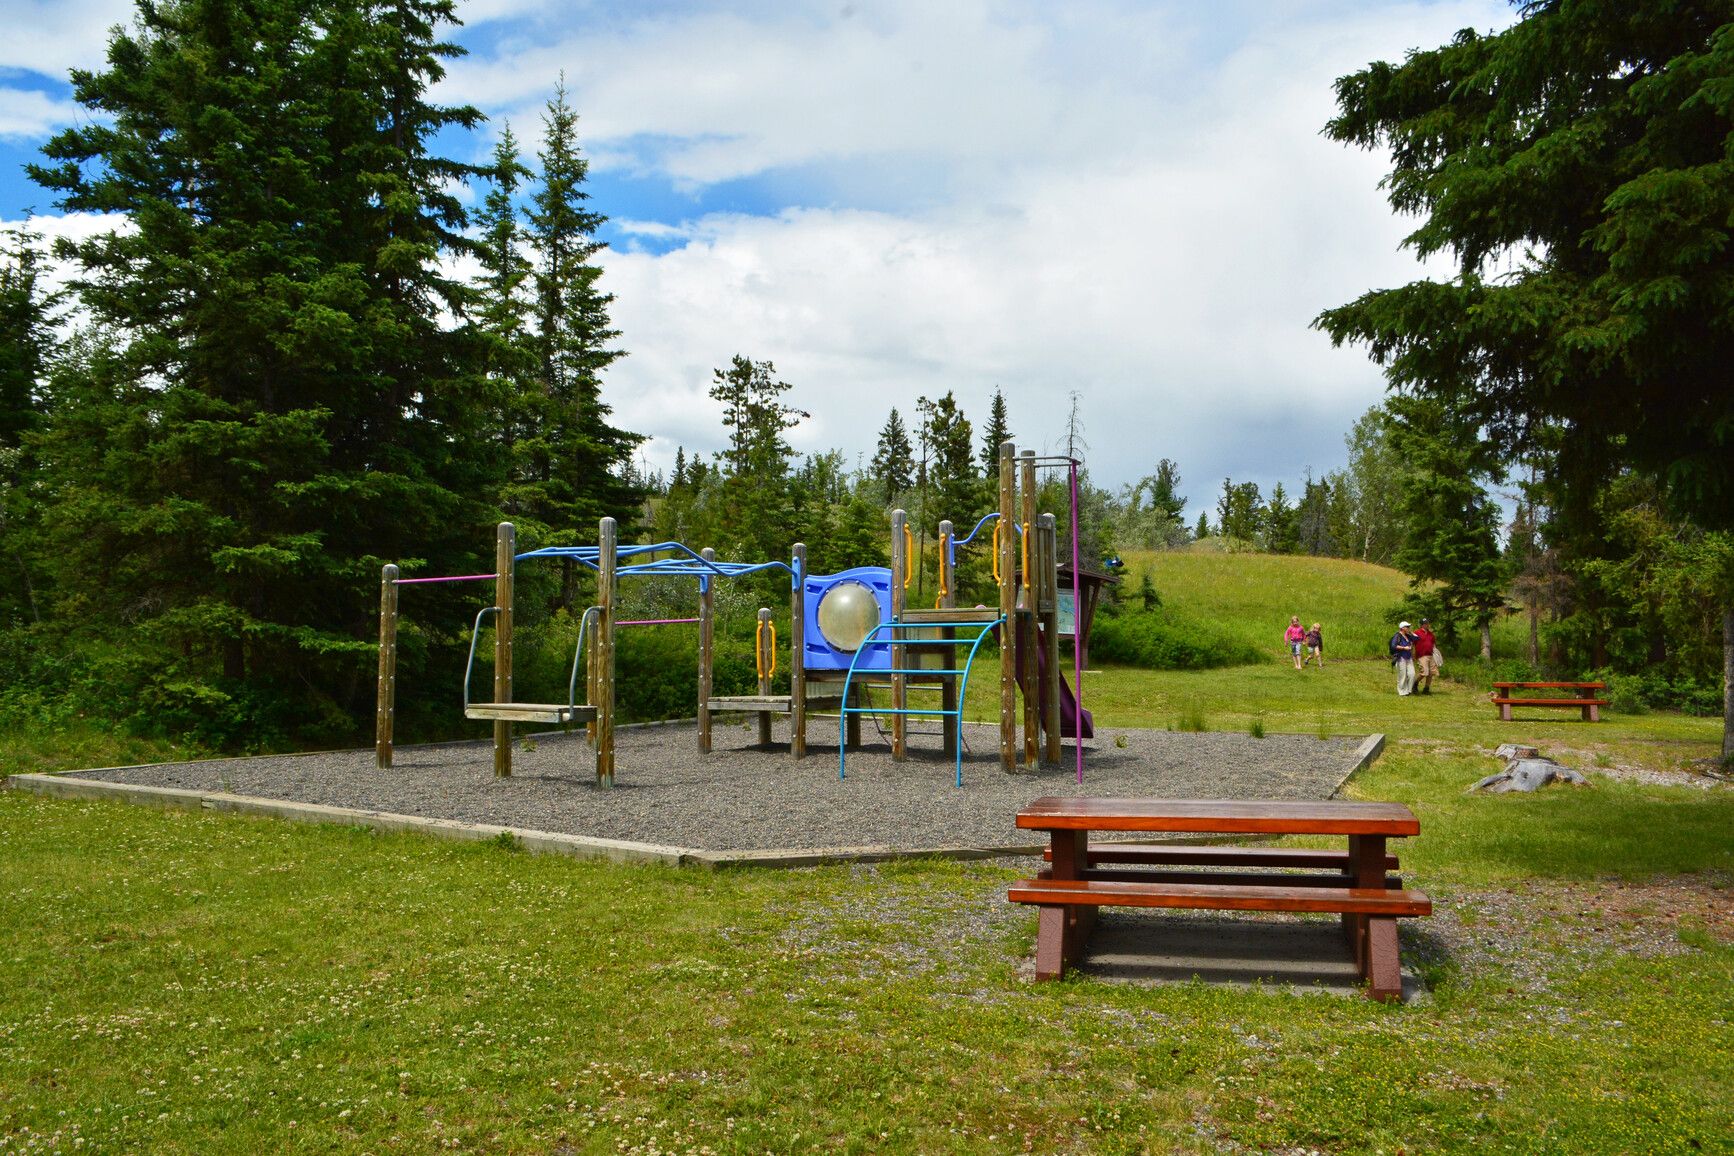 Discover the family outing spot at Big Bar Lake Park, where the playground area and picnic tables create an inviting place for outdoor activities with your kids.